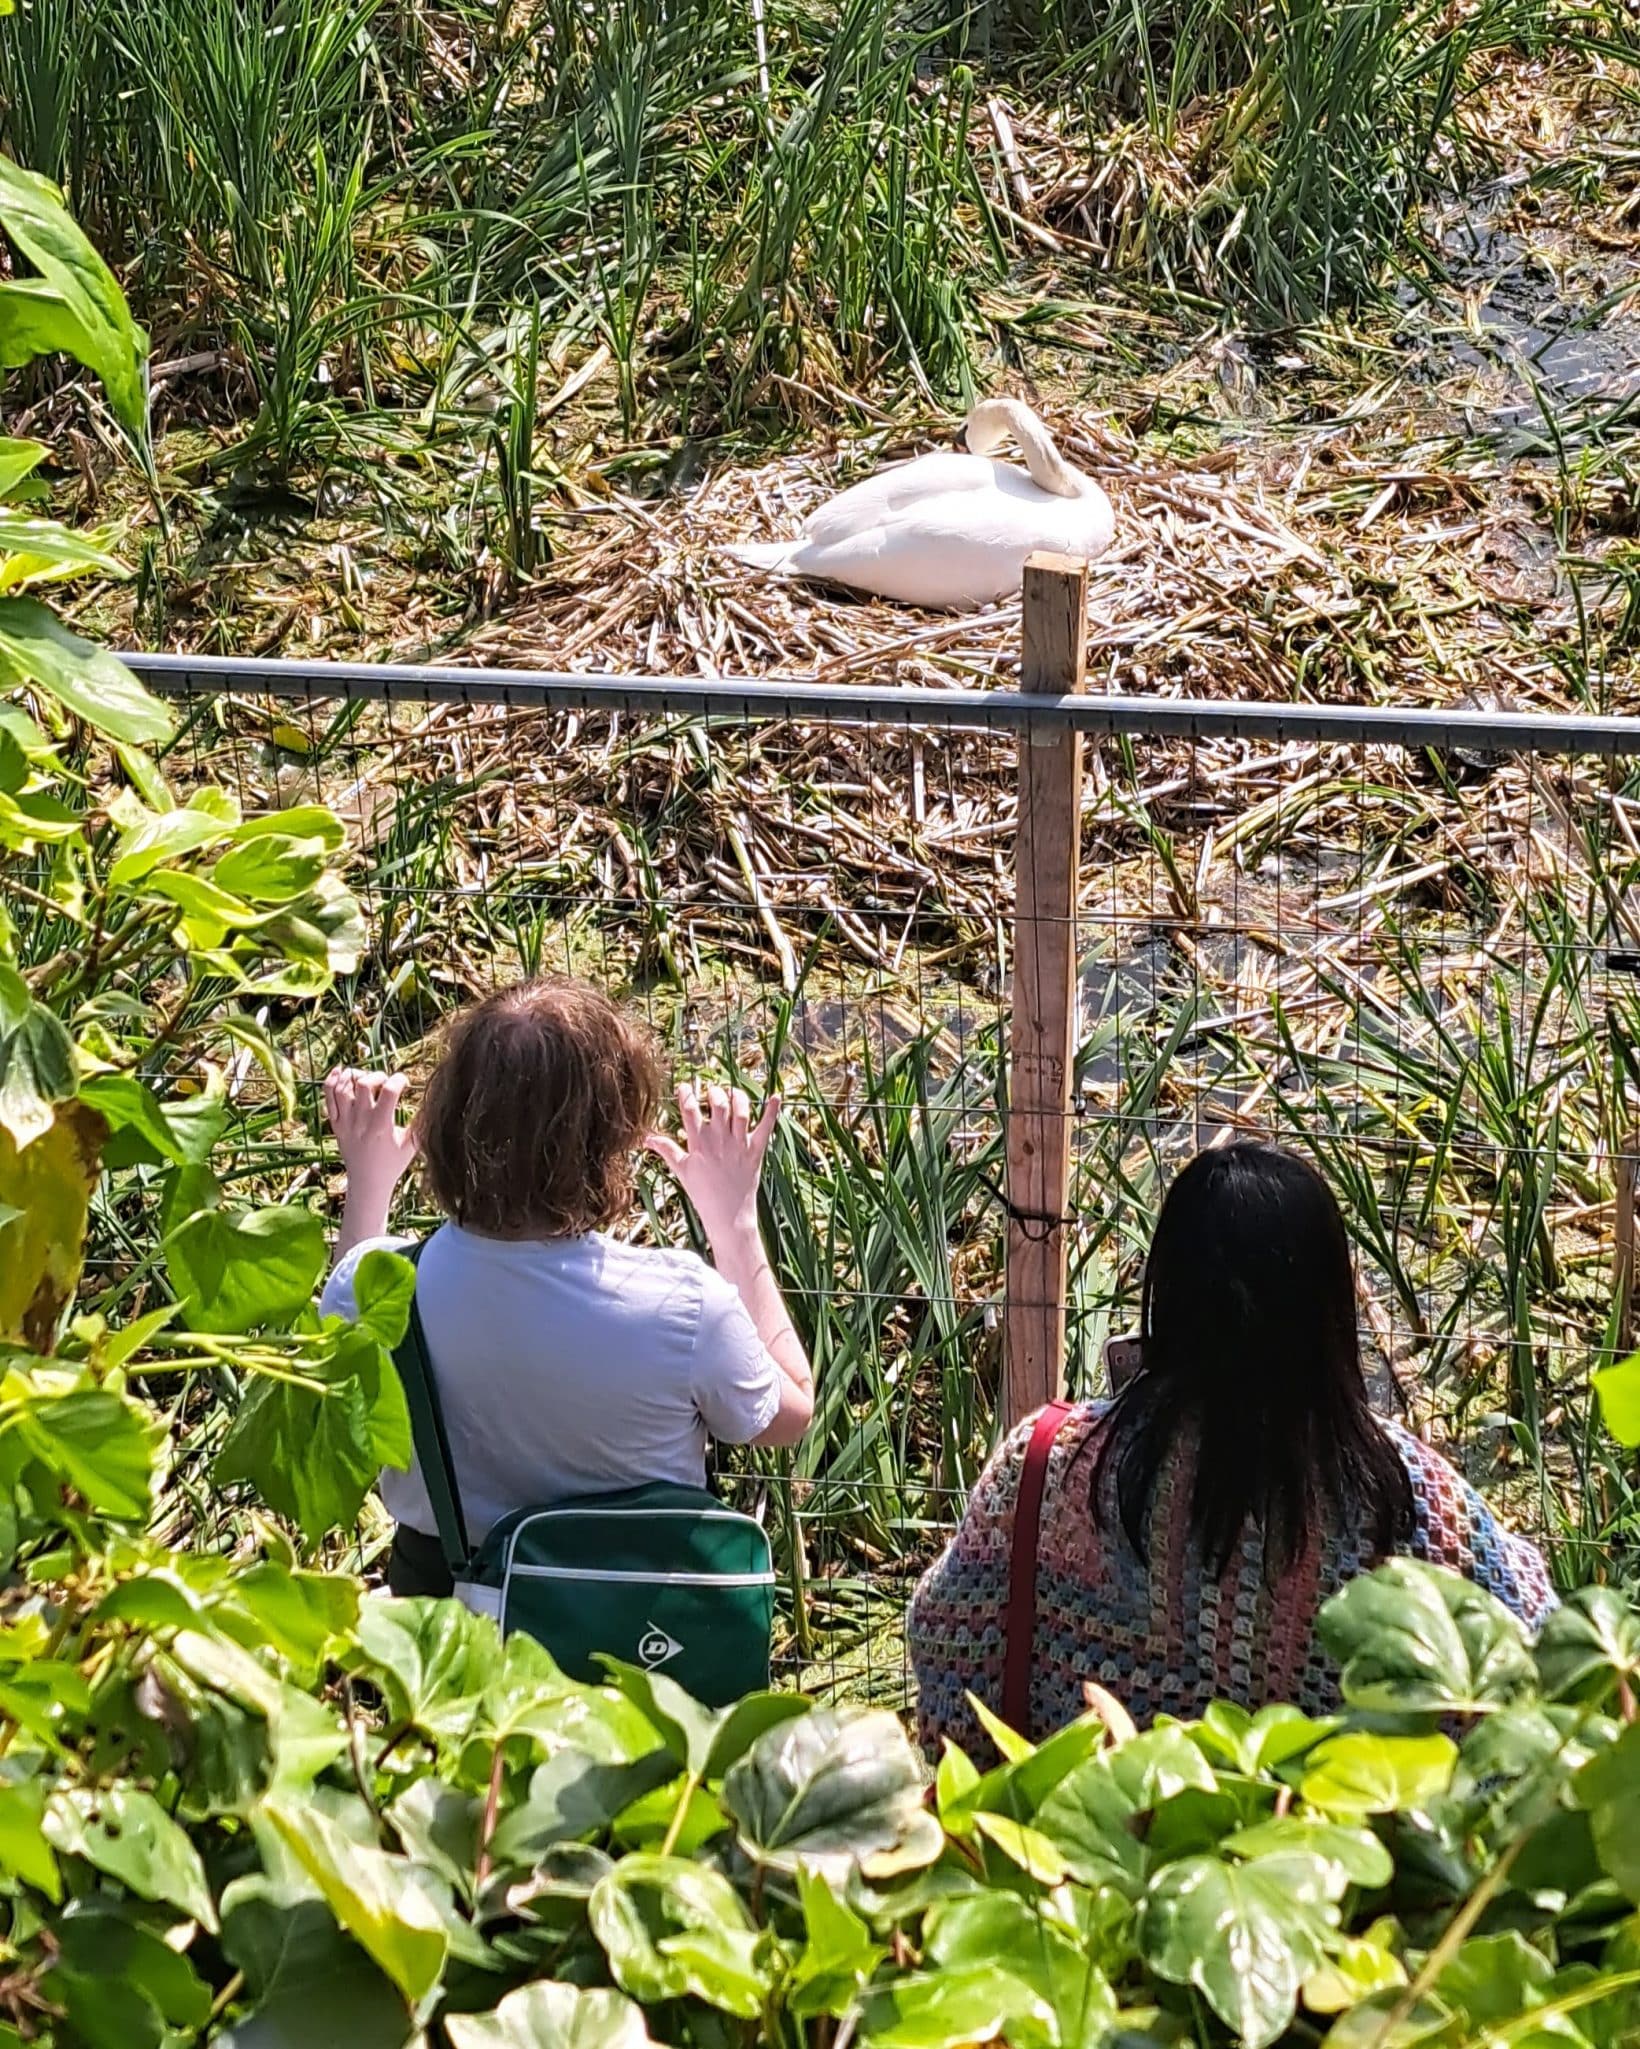 Park visitors watching the swans